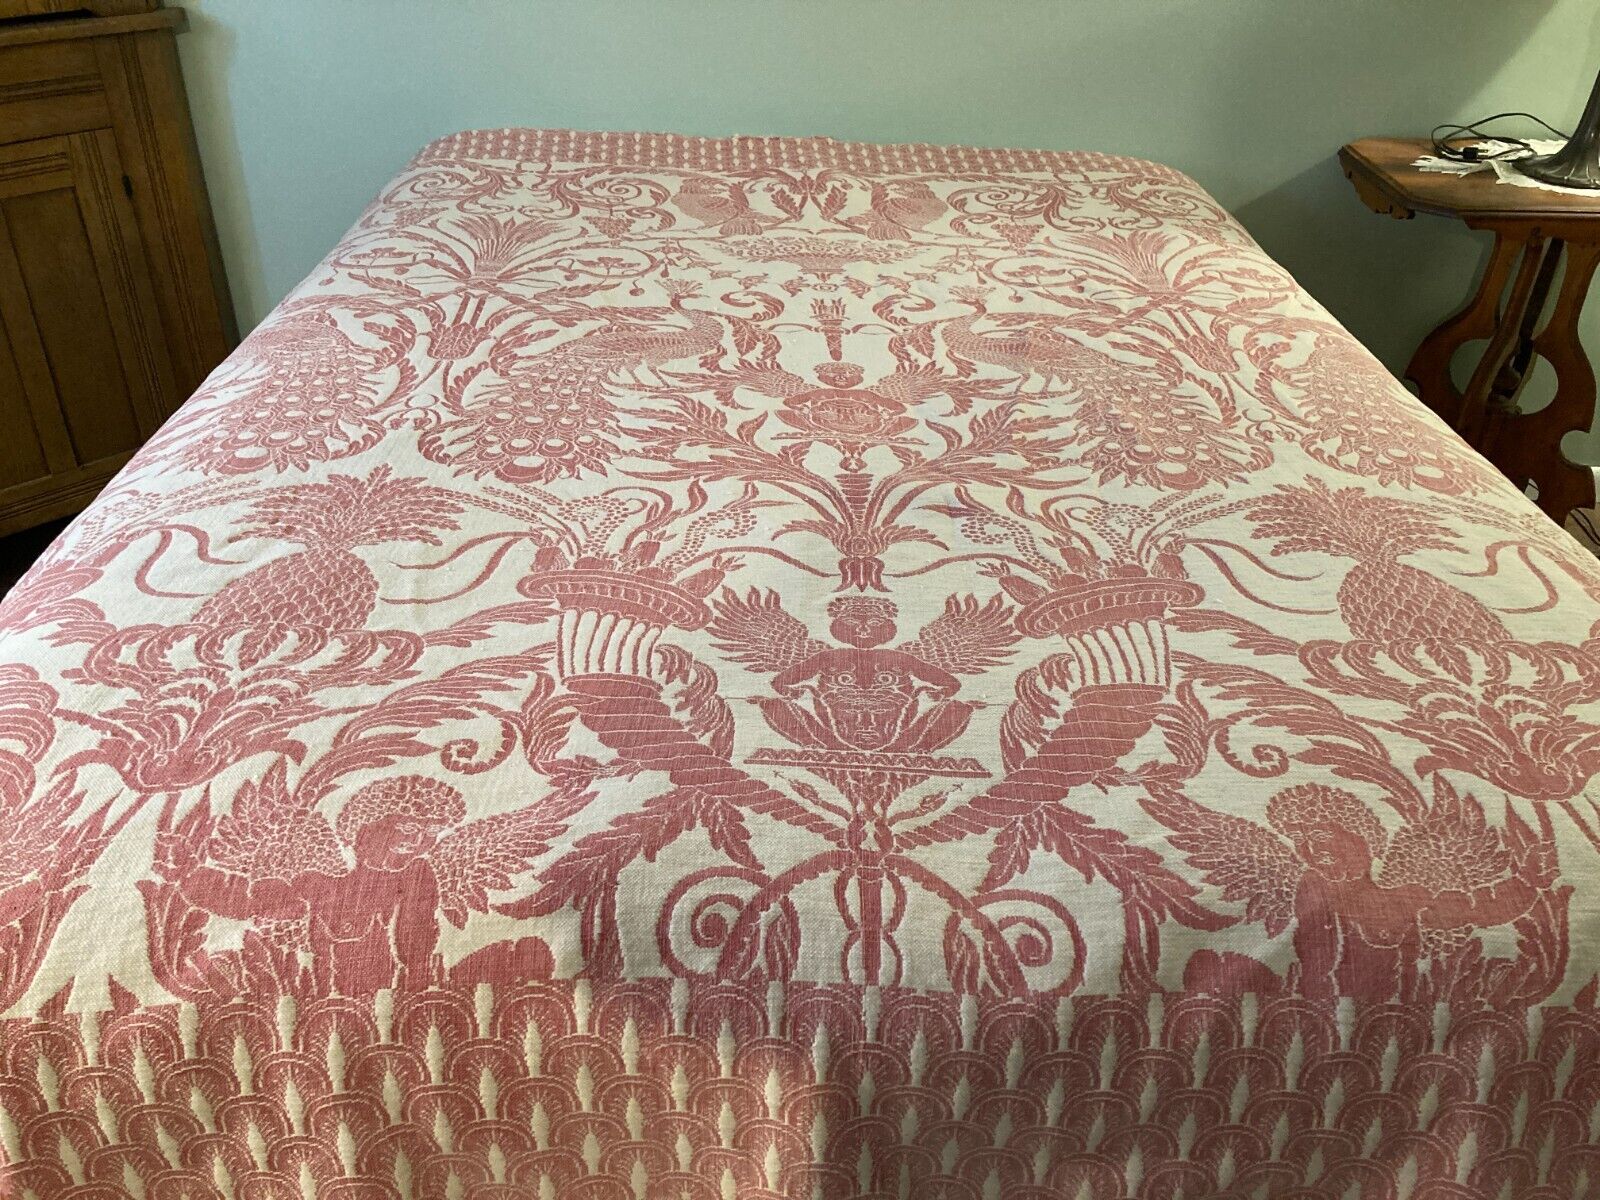 Antique  Red and White Hand Woven Coverlet Coconuts, Cherubs Peacocks, Parrots,